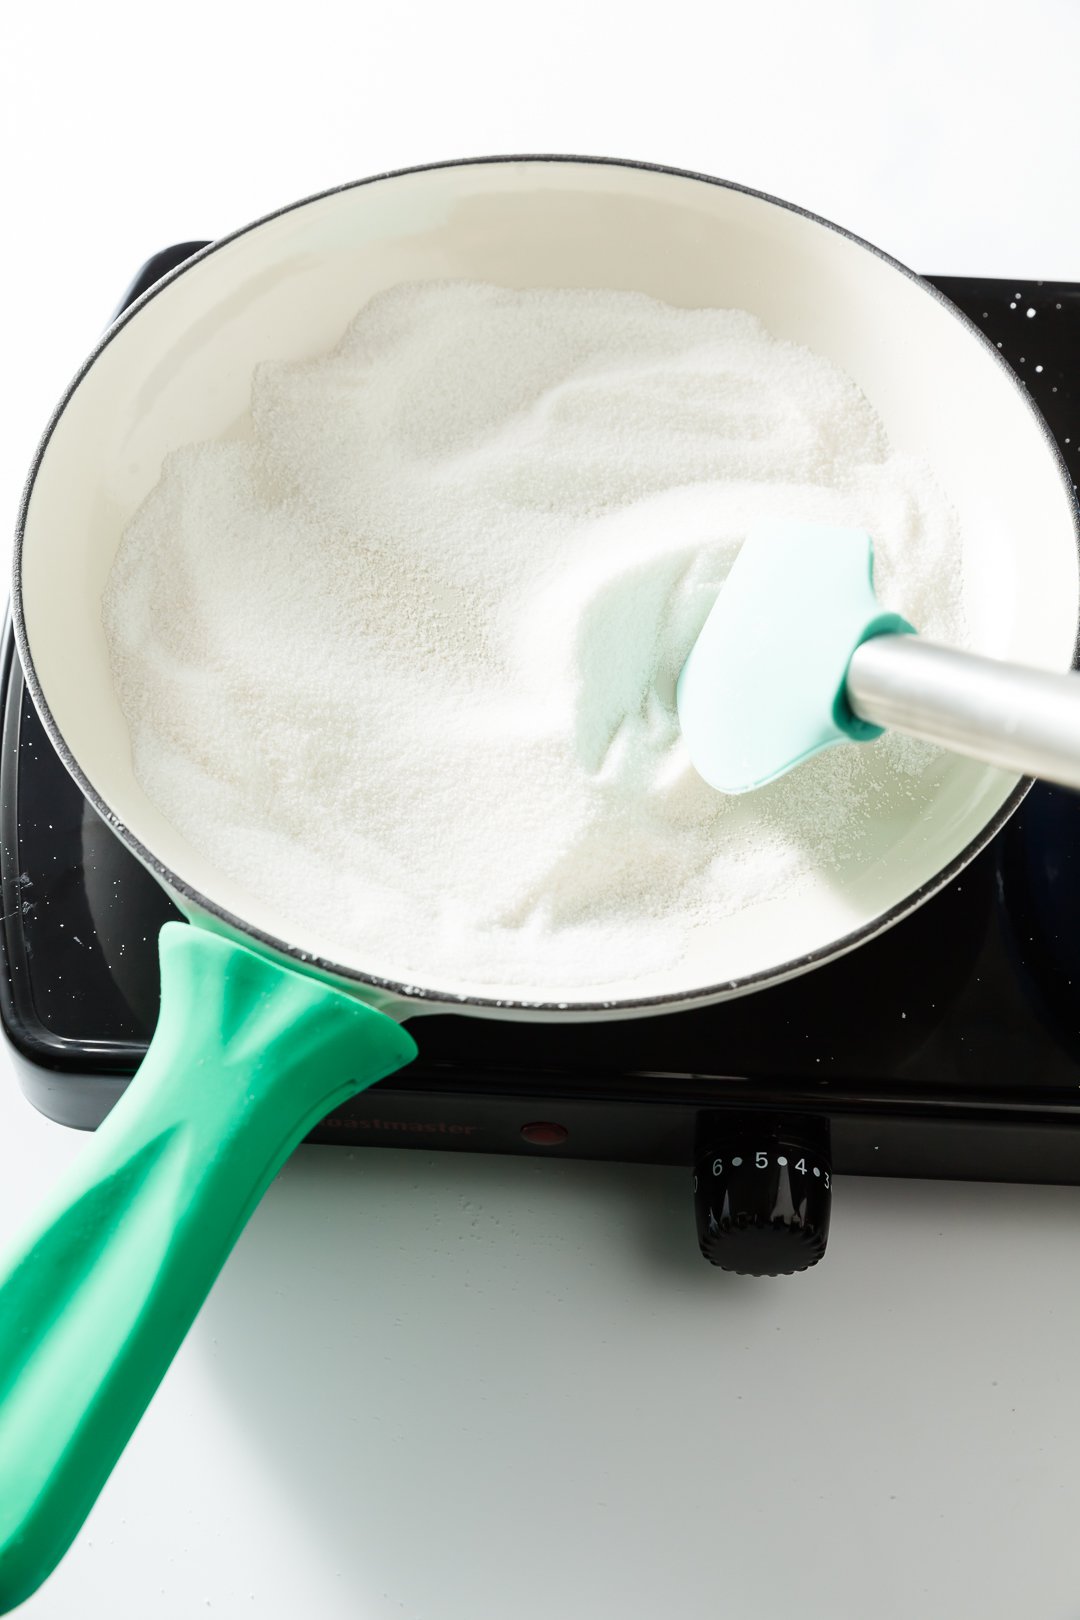 Sugar pushed with a spatula in a skillet